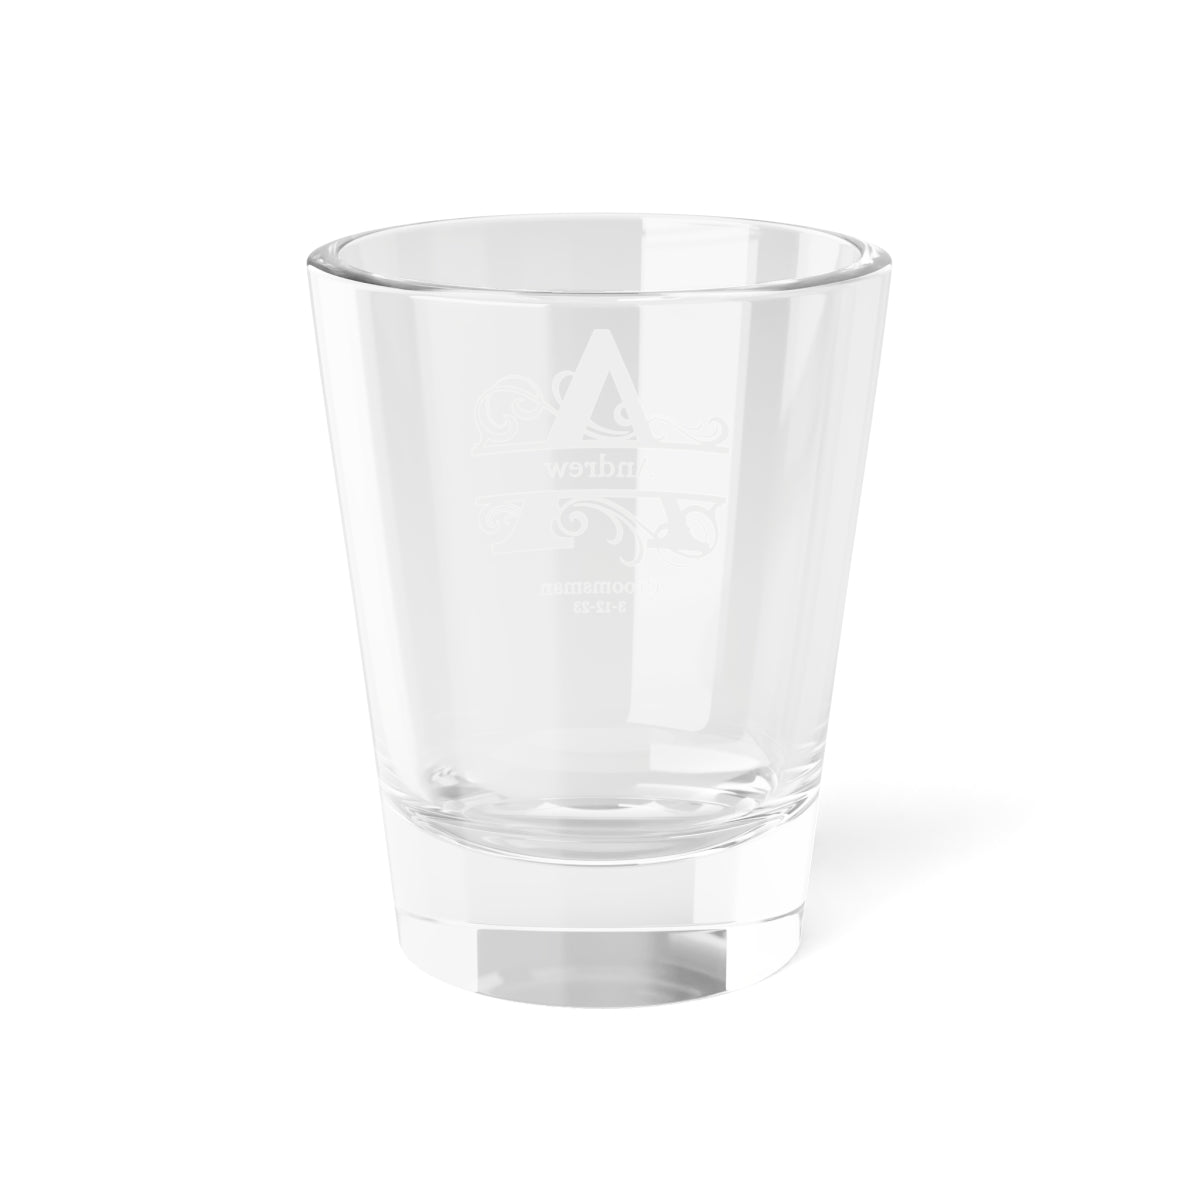 Get trendy with Monogrammed Shot Glass, 1.5oz -  available at Good Gift Company. Grab yours for $14.72 today!